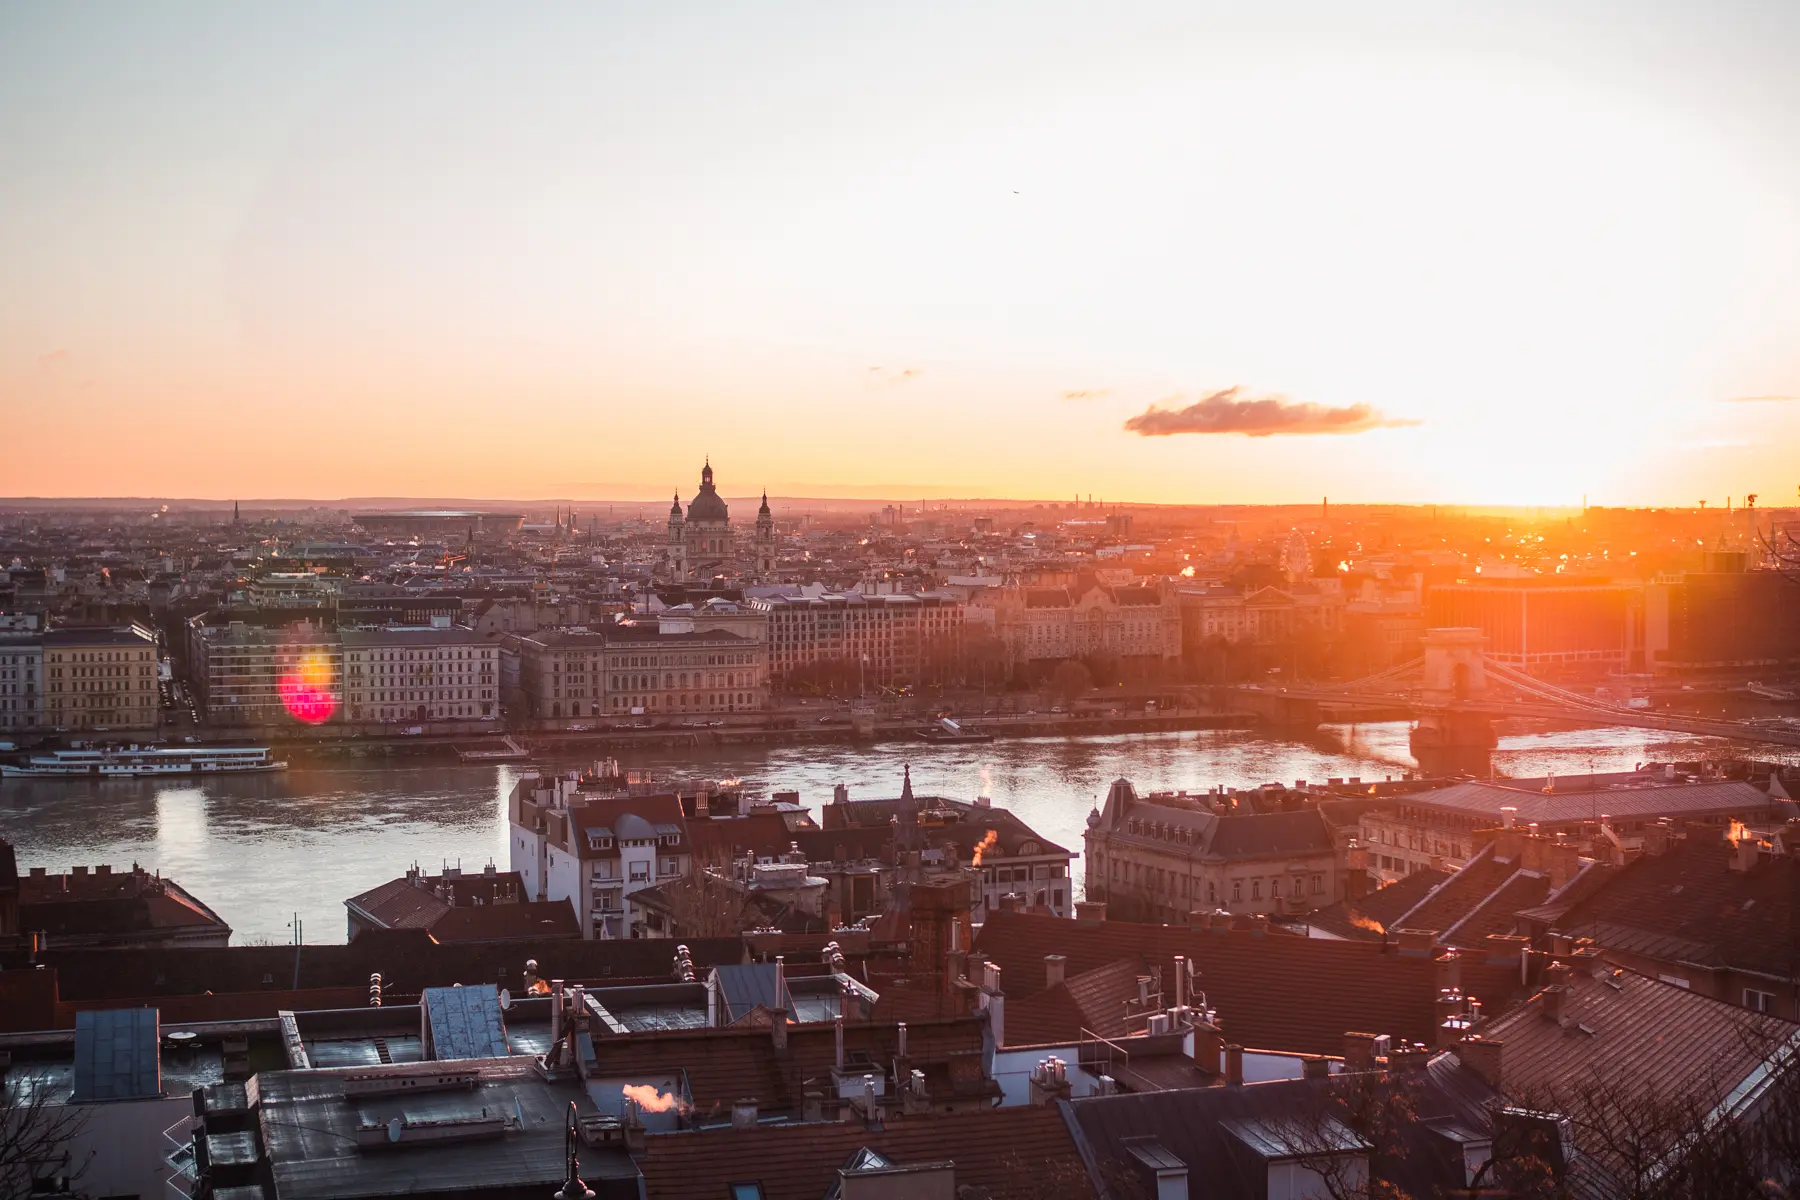 View over Pest, Danube River and hidden gems from Buda Castle during an orange sunrise in Budapest.